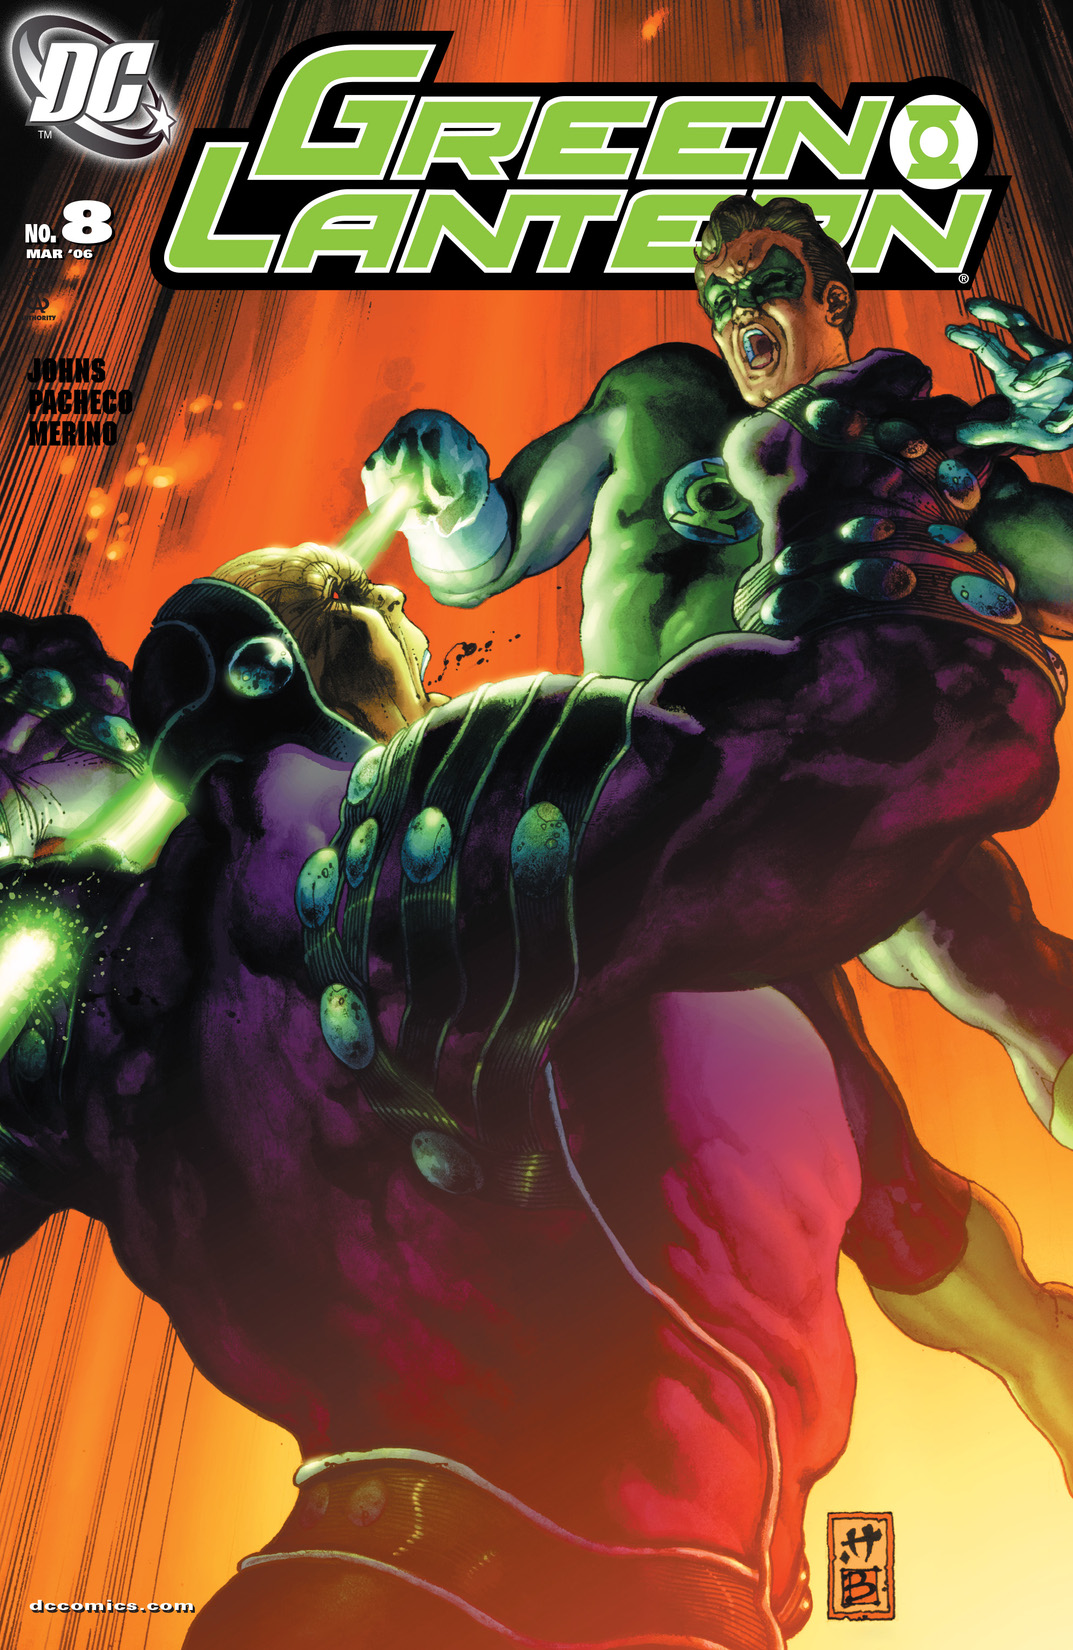 Green Lantern (2005-2011) #8 preview images